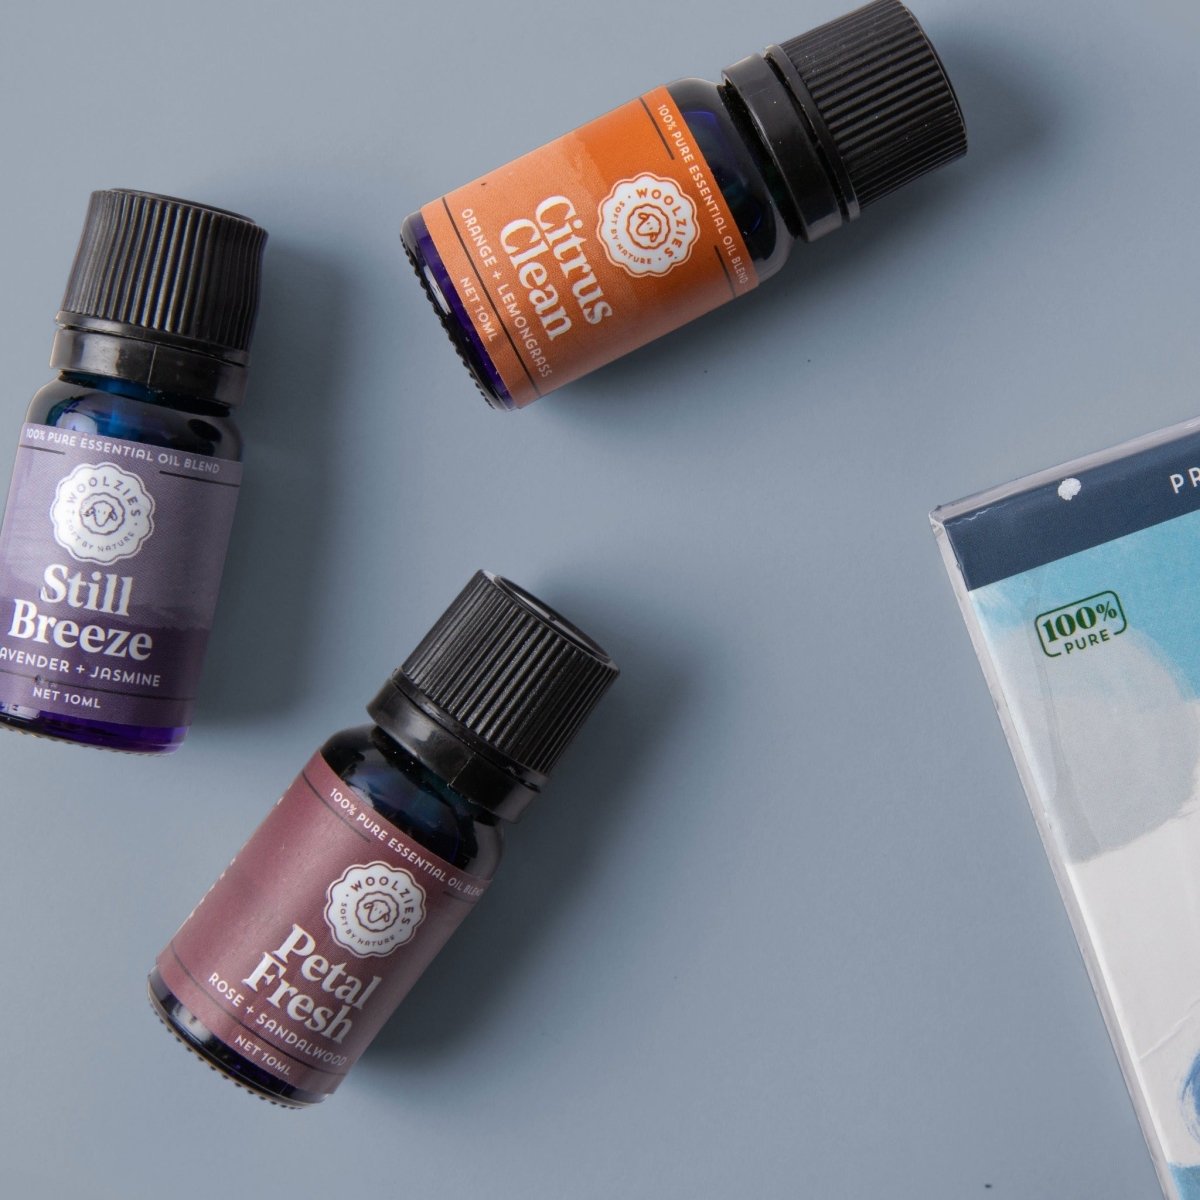 Load image into Gallery viewer, Woolzies The Laundry Essential Oil Collection - lily &amp;amp; onyx
